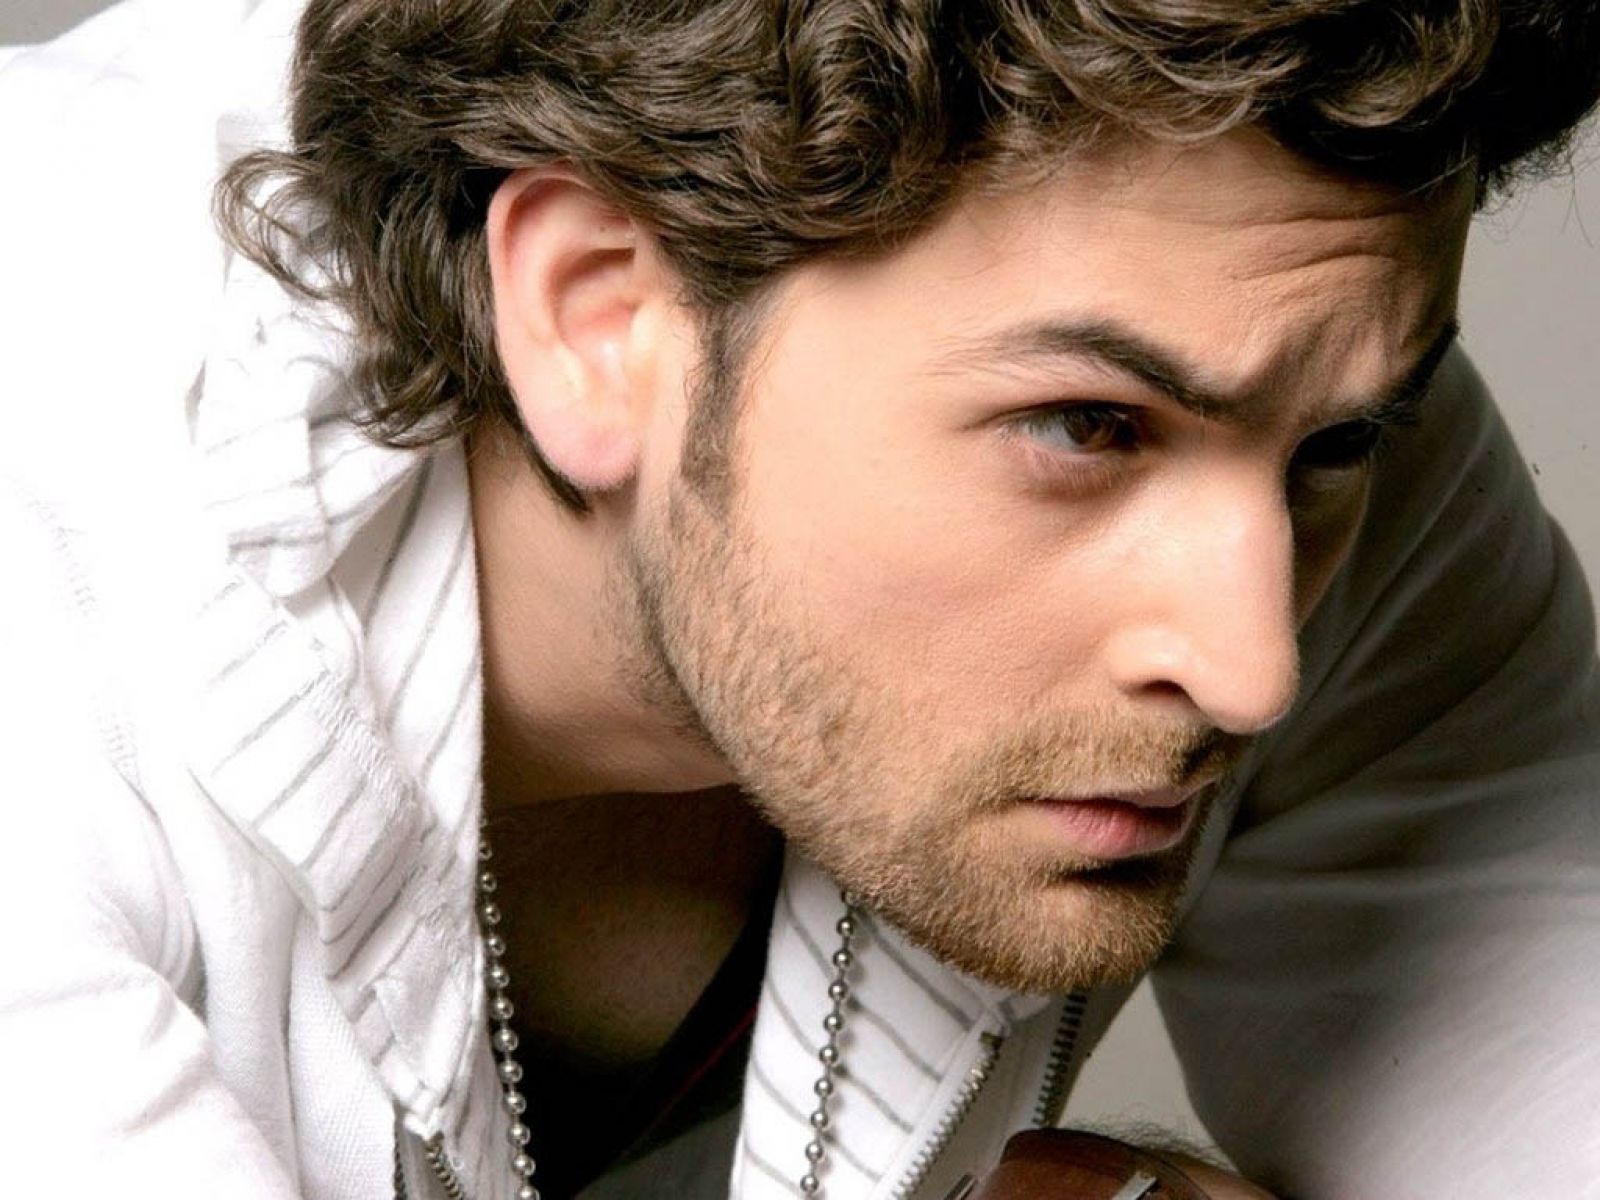 Neil Nitin Mukesh From His Film David. HD Bollywood Actors Wallpaper for Mobile and Desktop